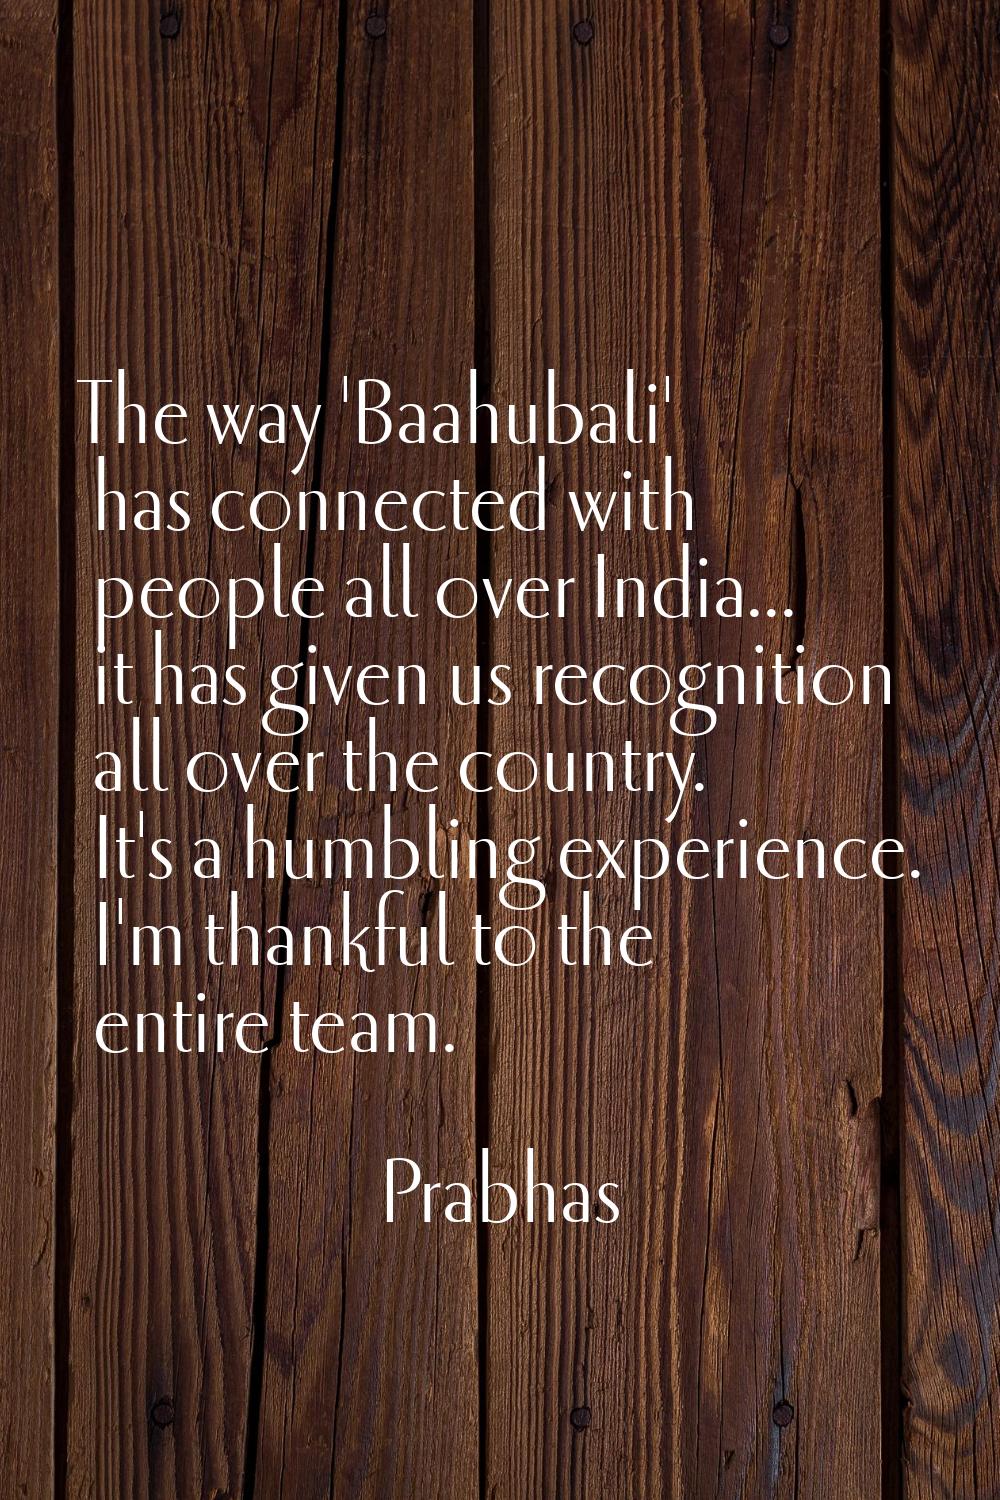 The way 'Baahubali' has connected with people all over India... it has given us recognition all ove